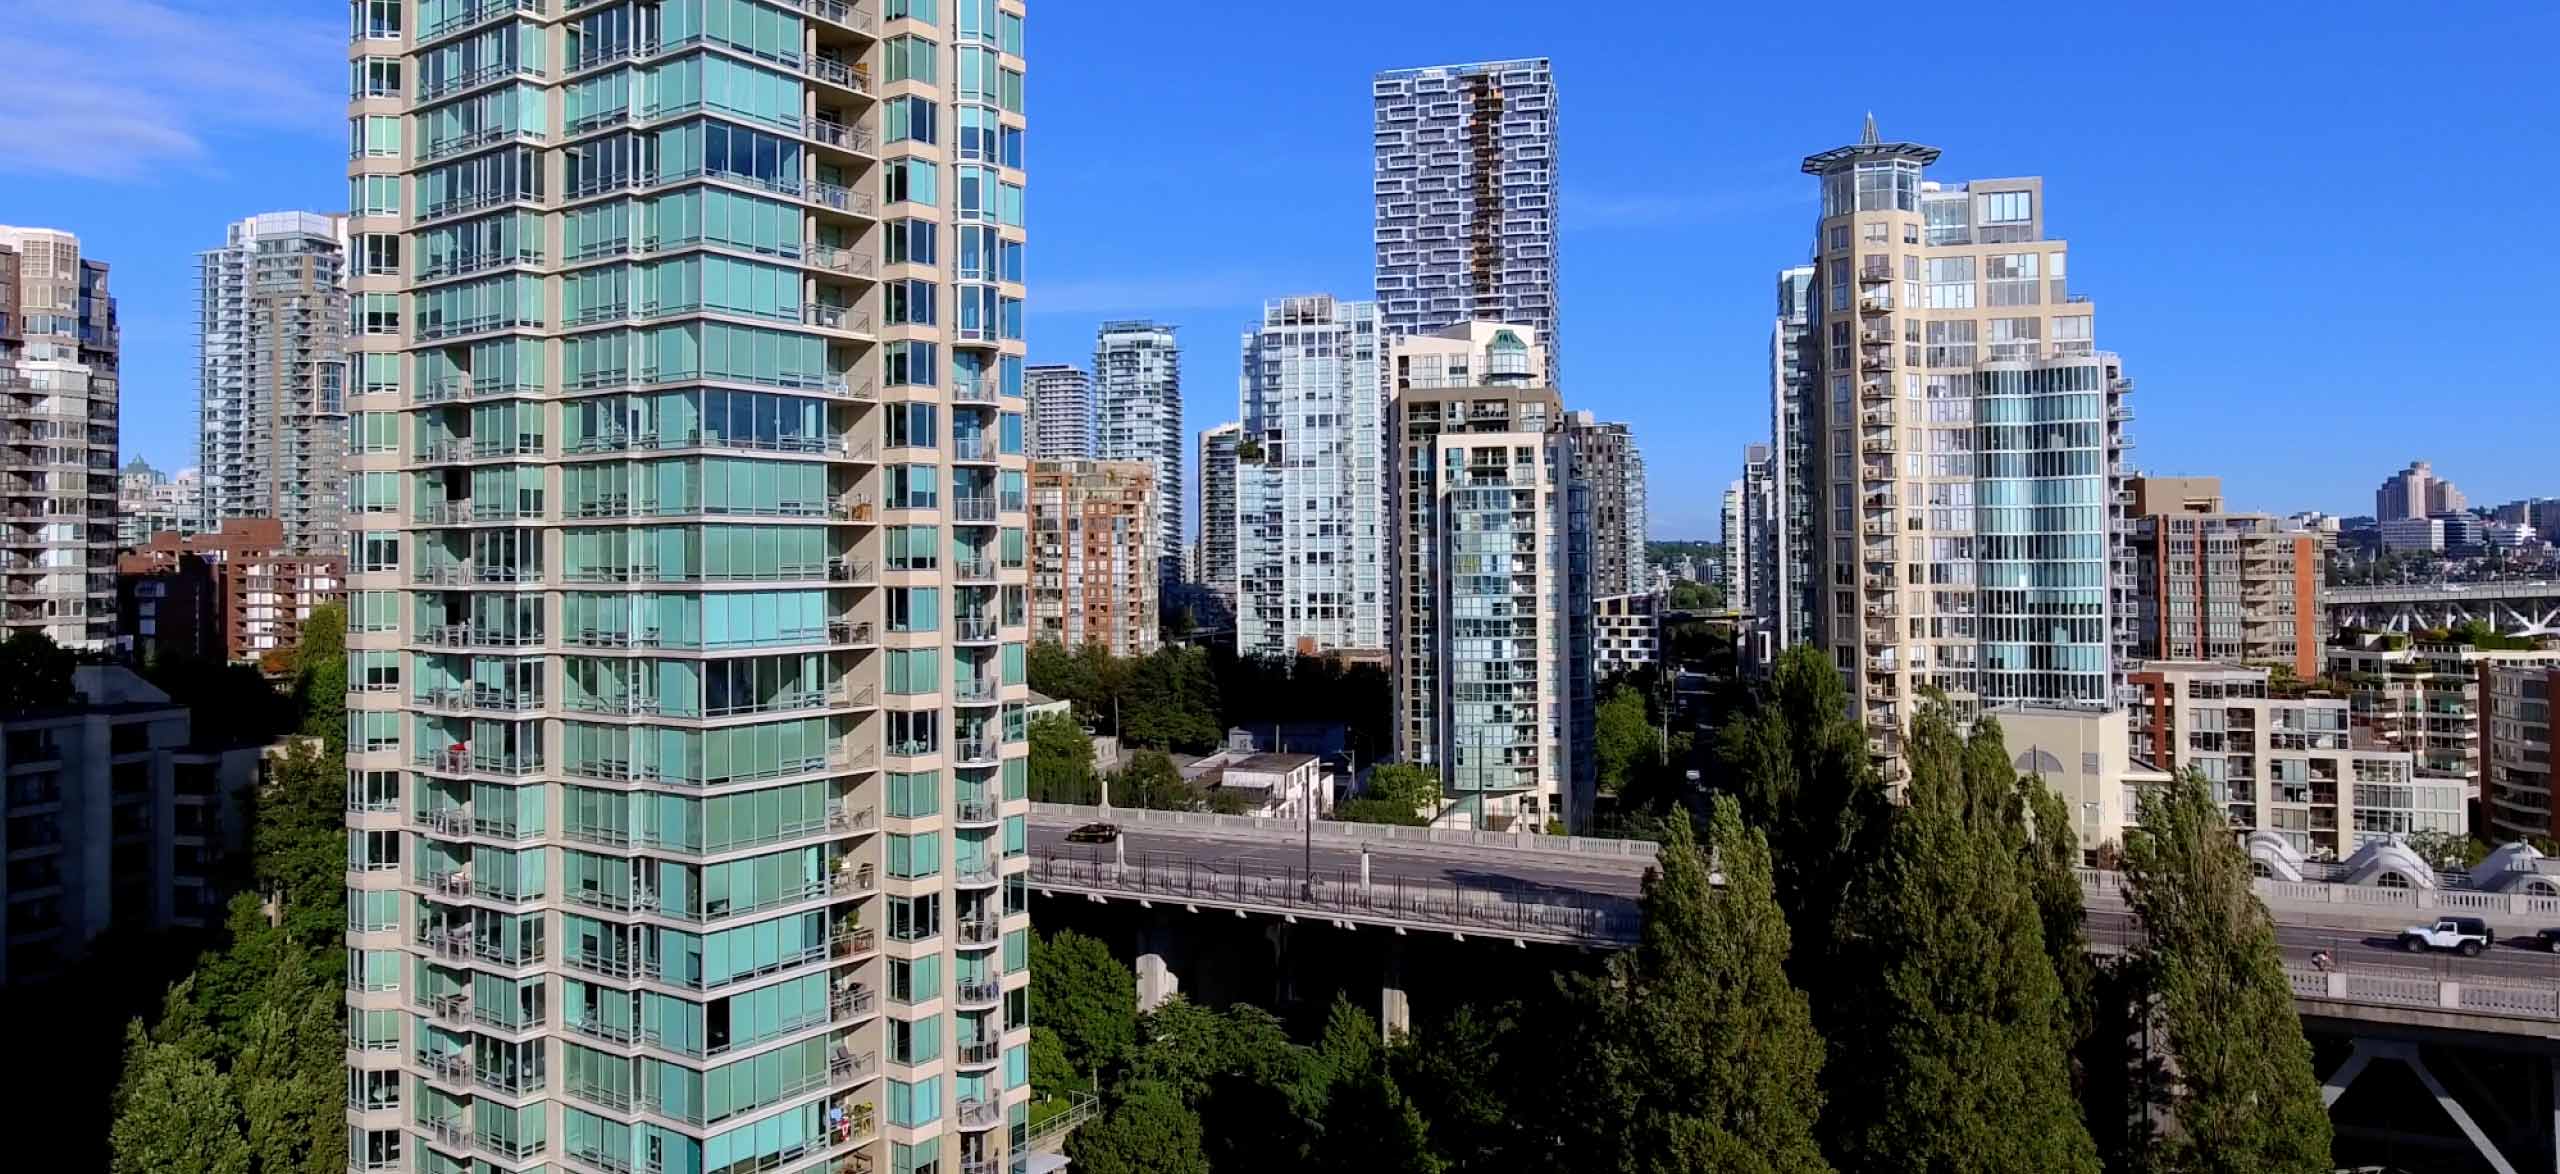 High rises in Vancouver next to a bridge